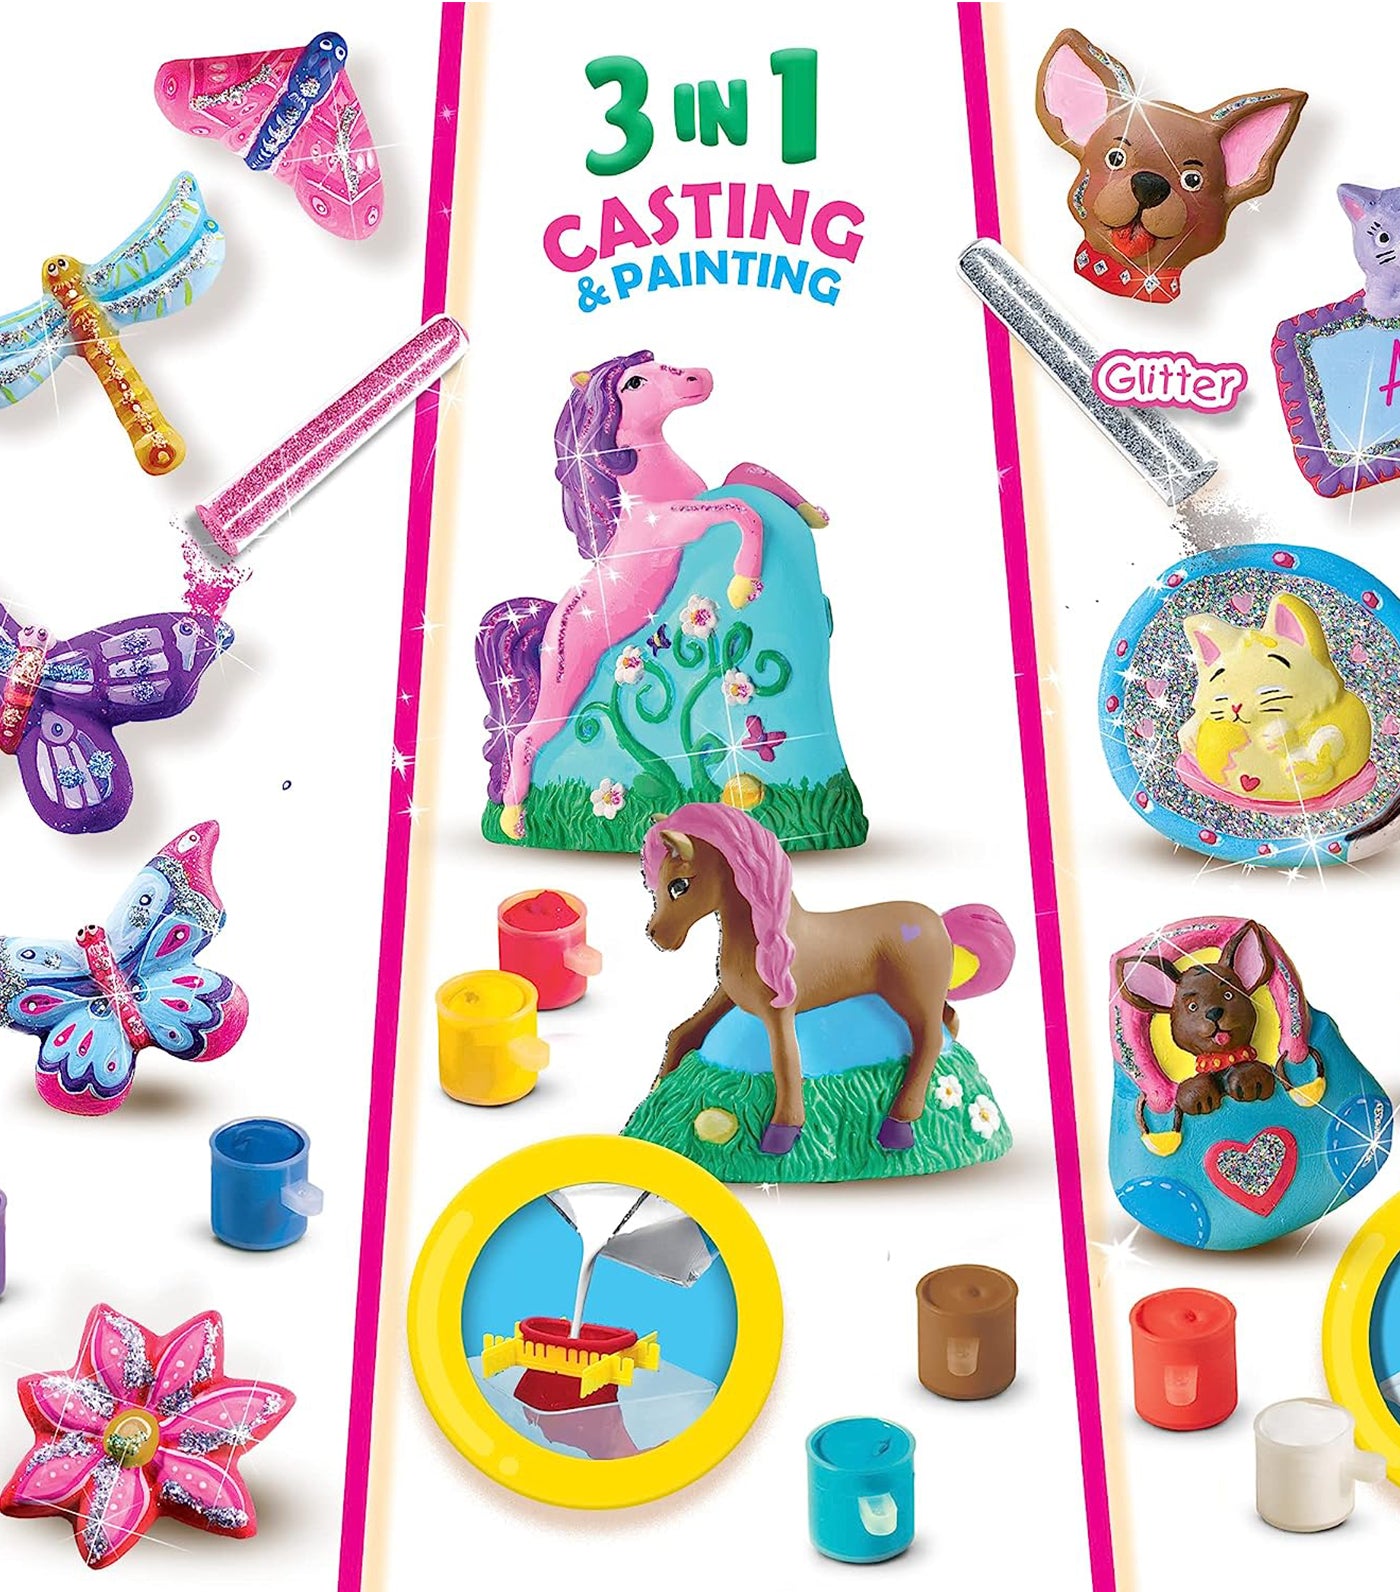 3-in-1 Casting and Painting Craft Kit